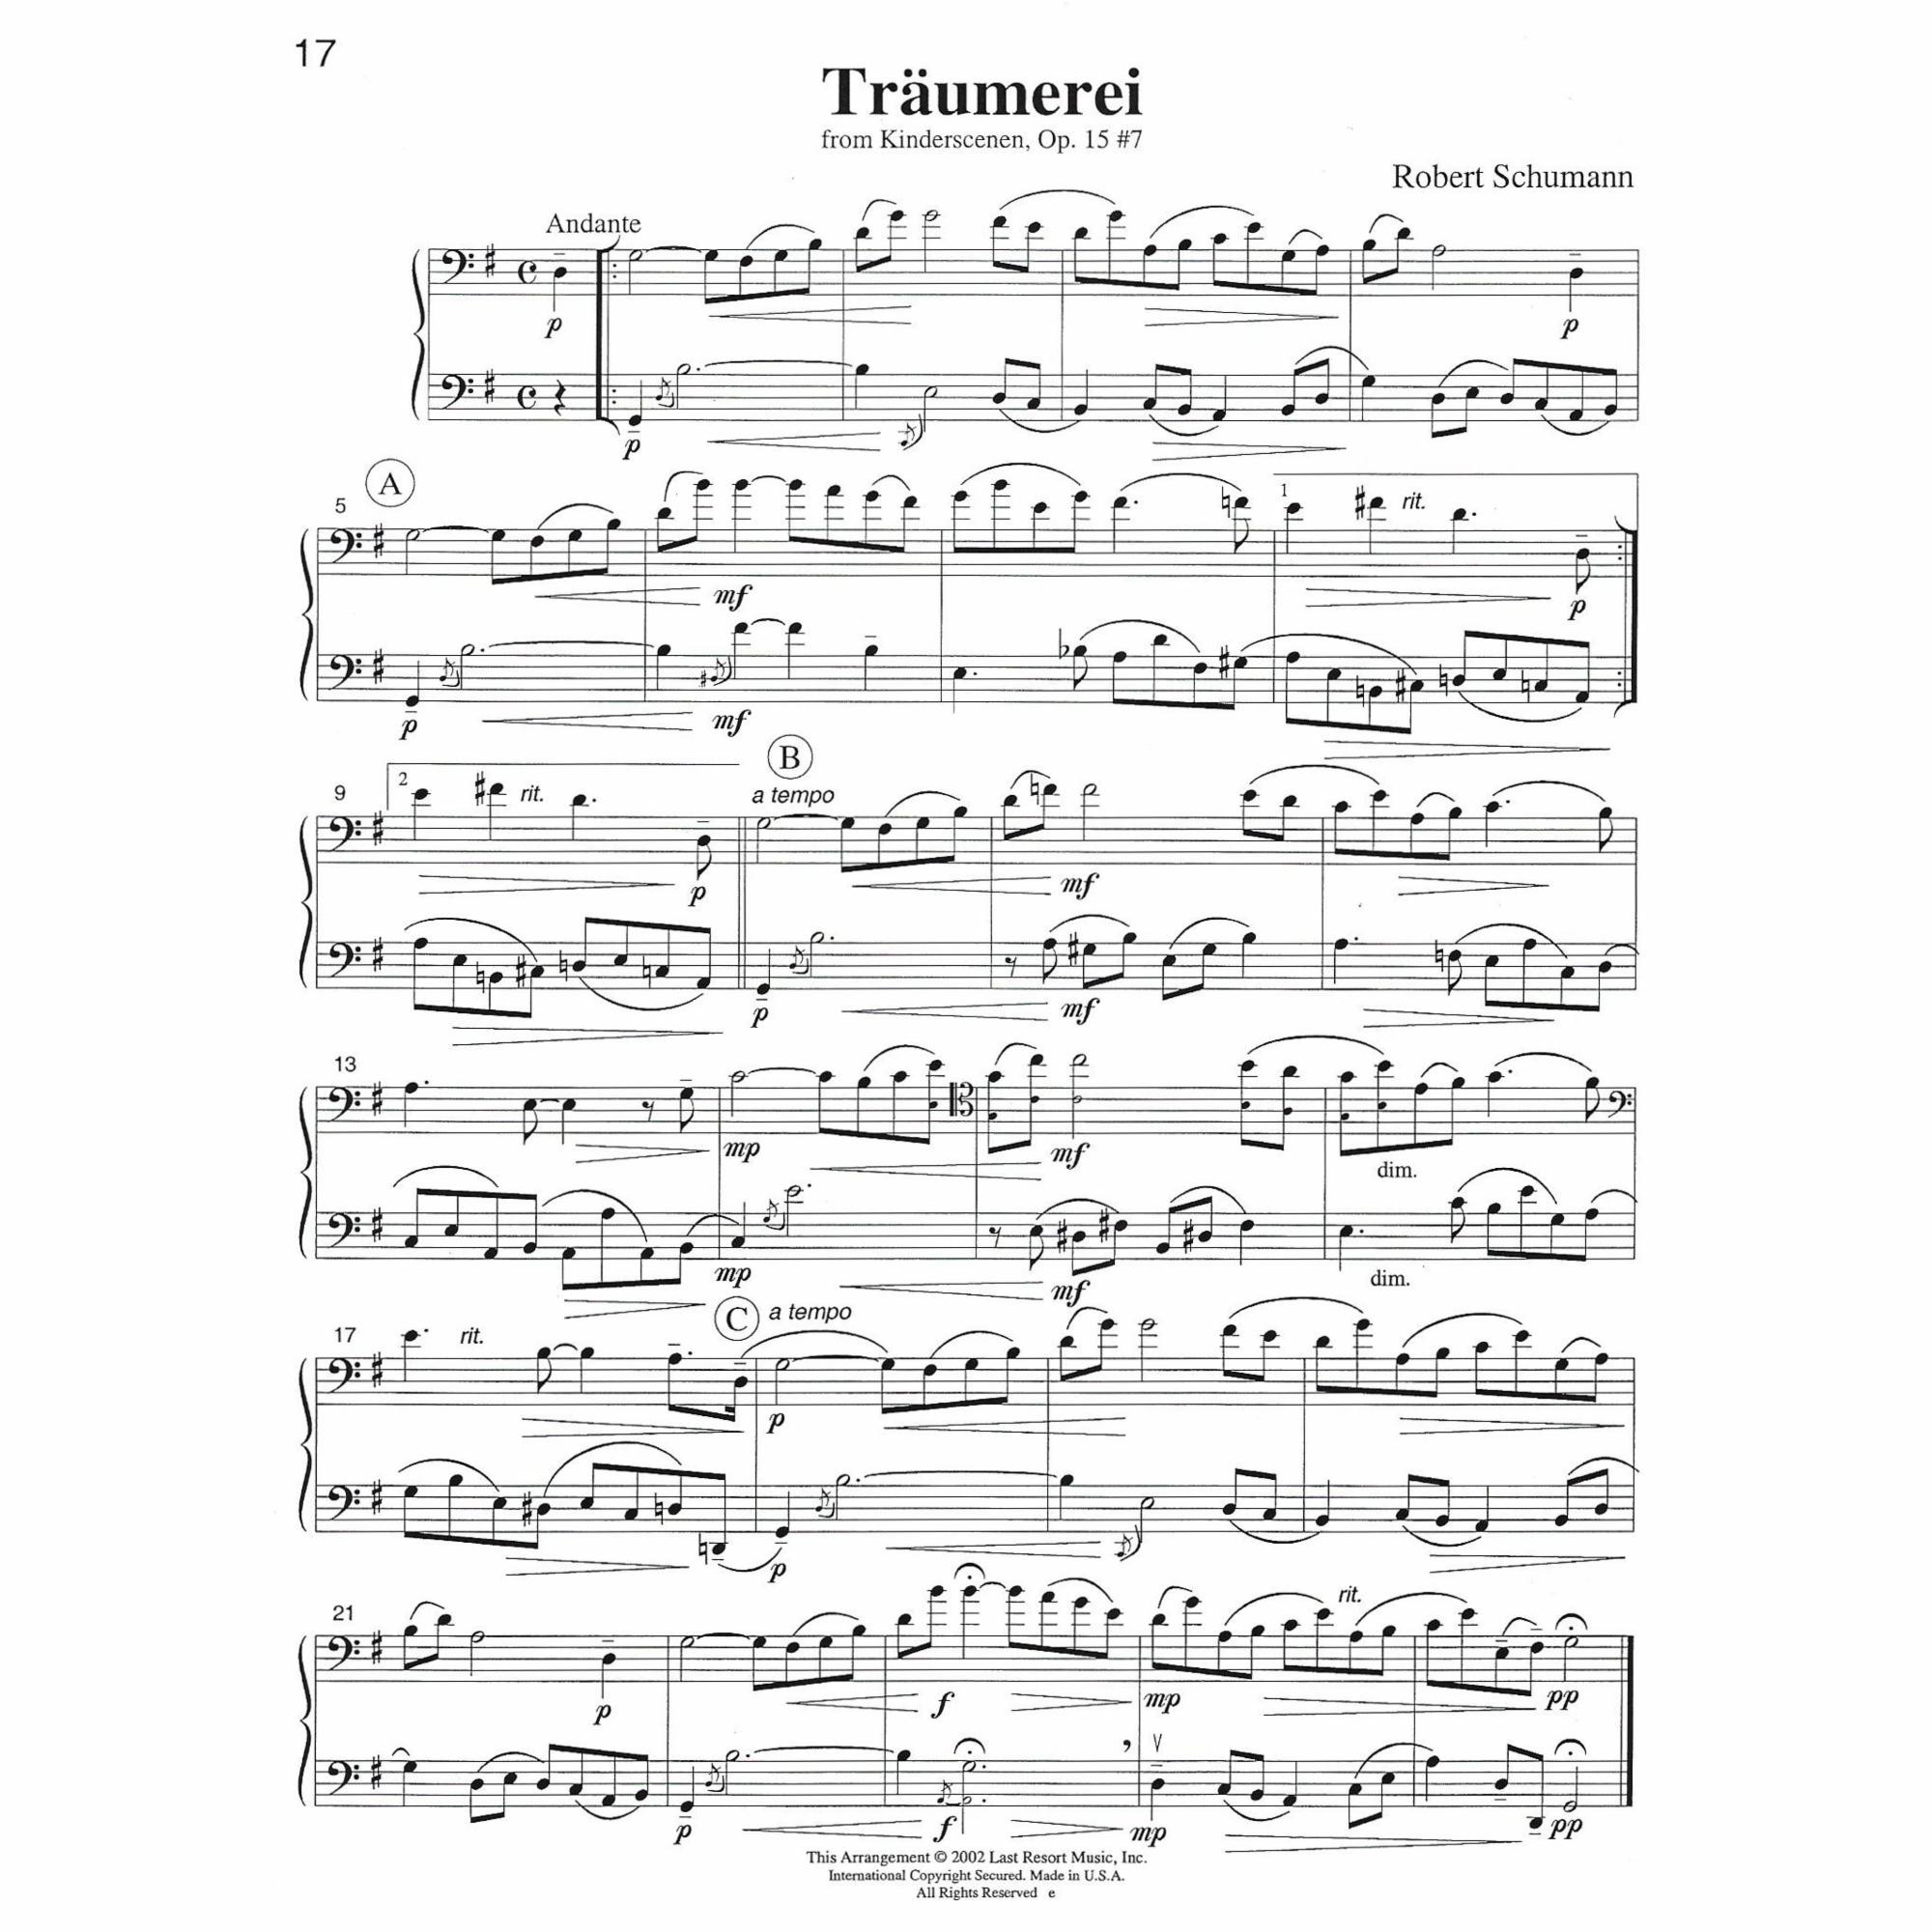 Sample: Two Cellos (Pg. 17)